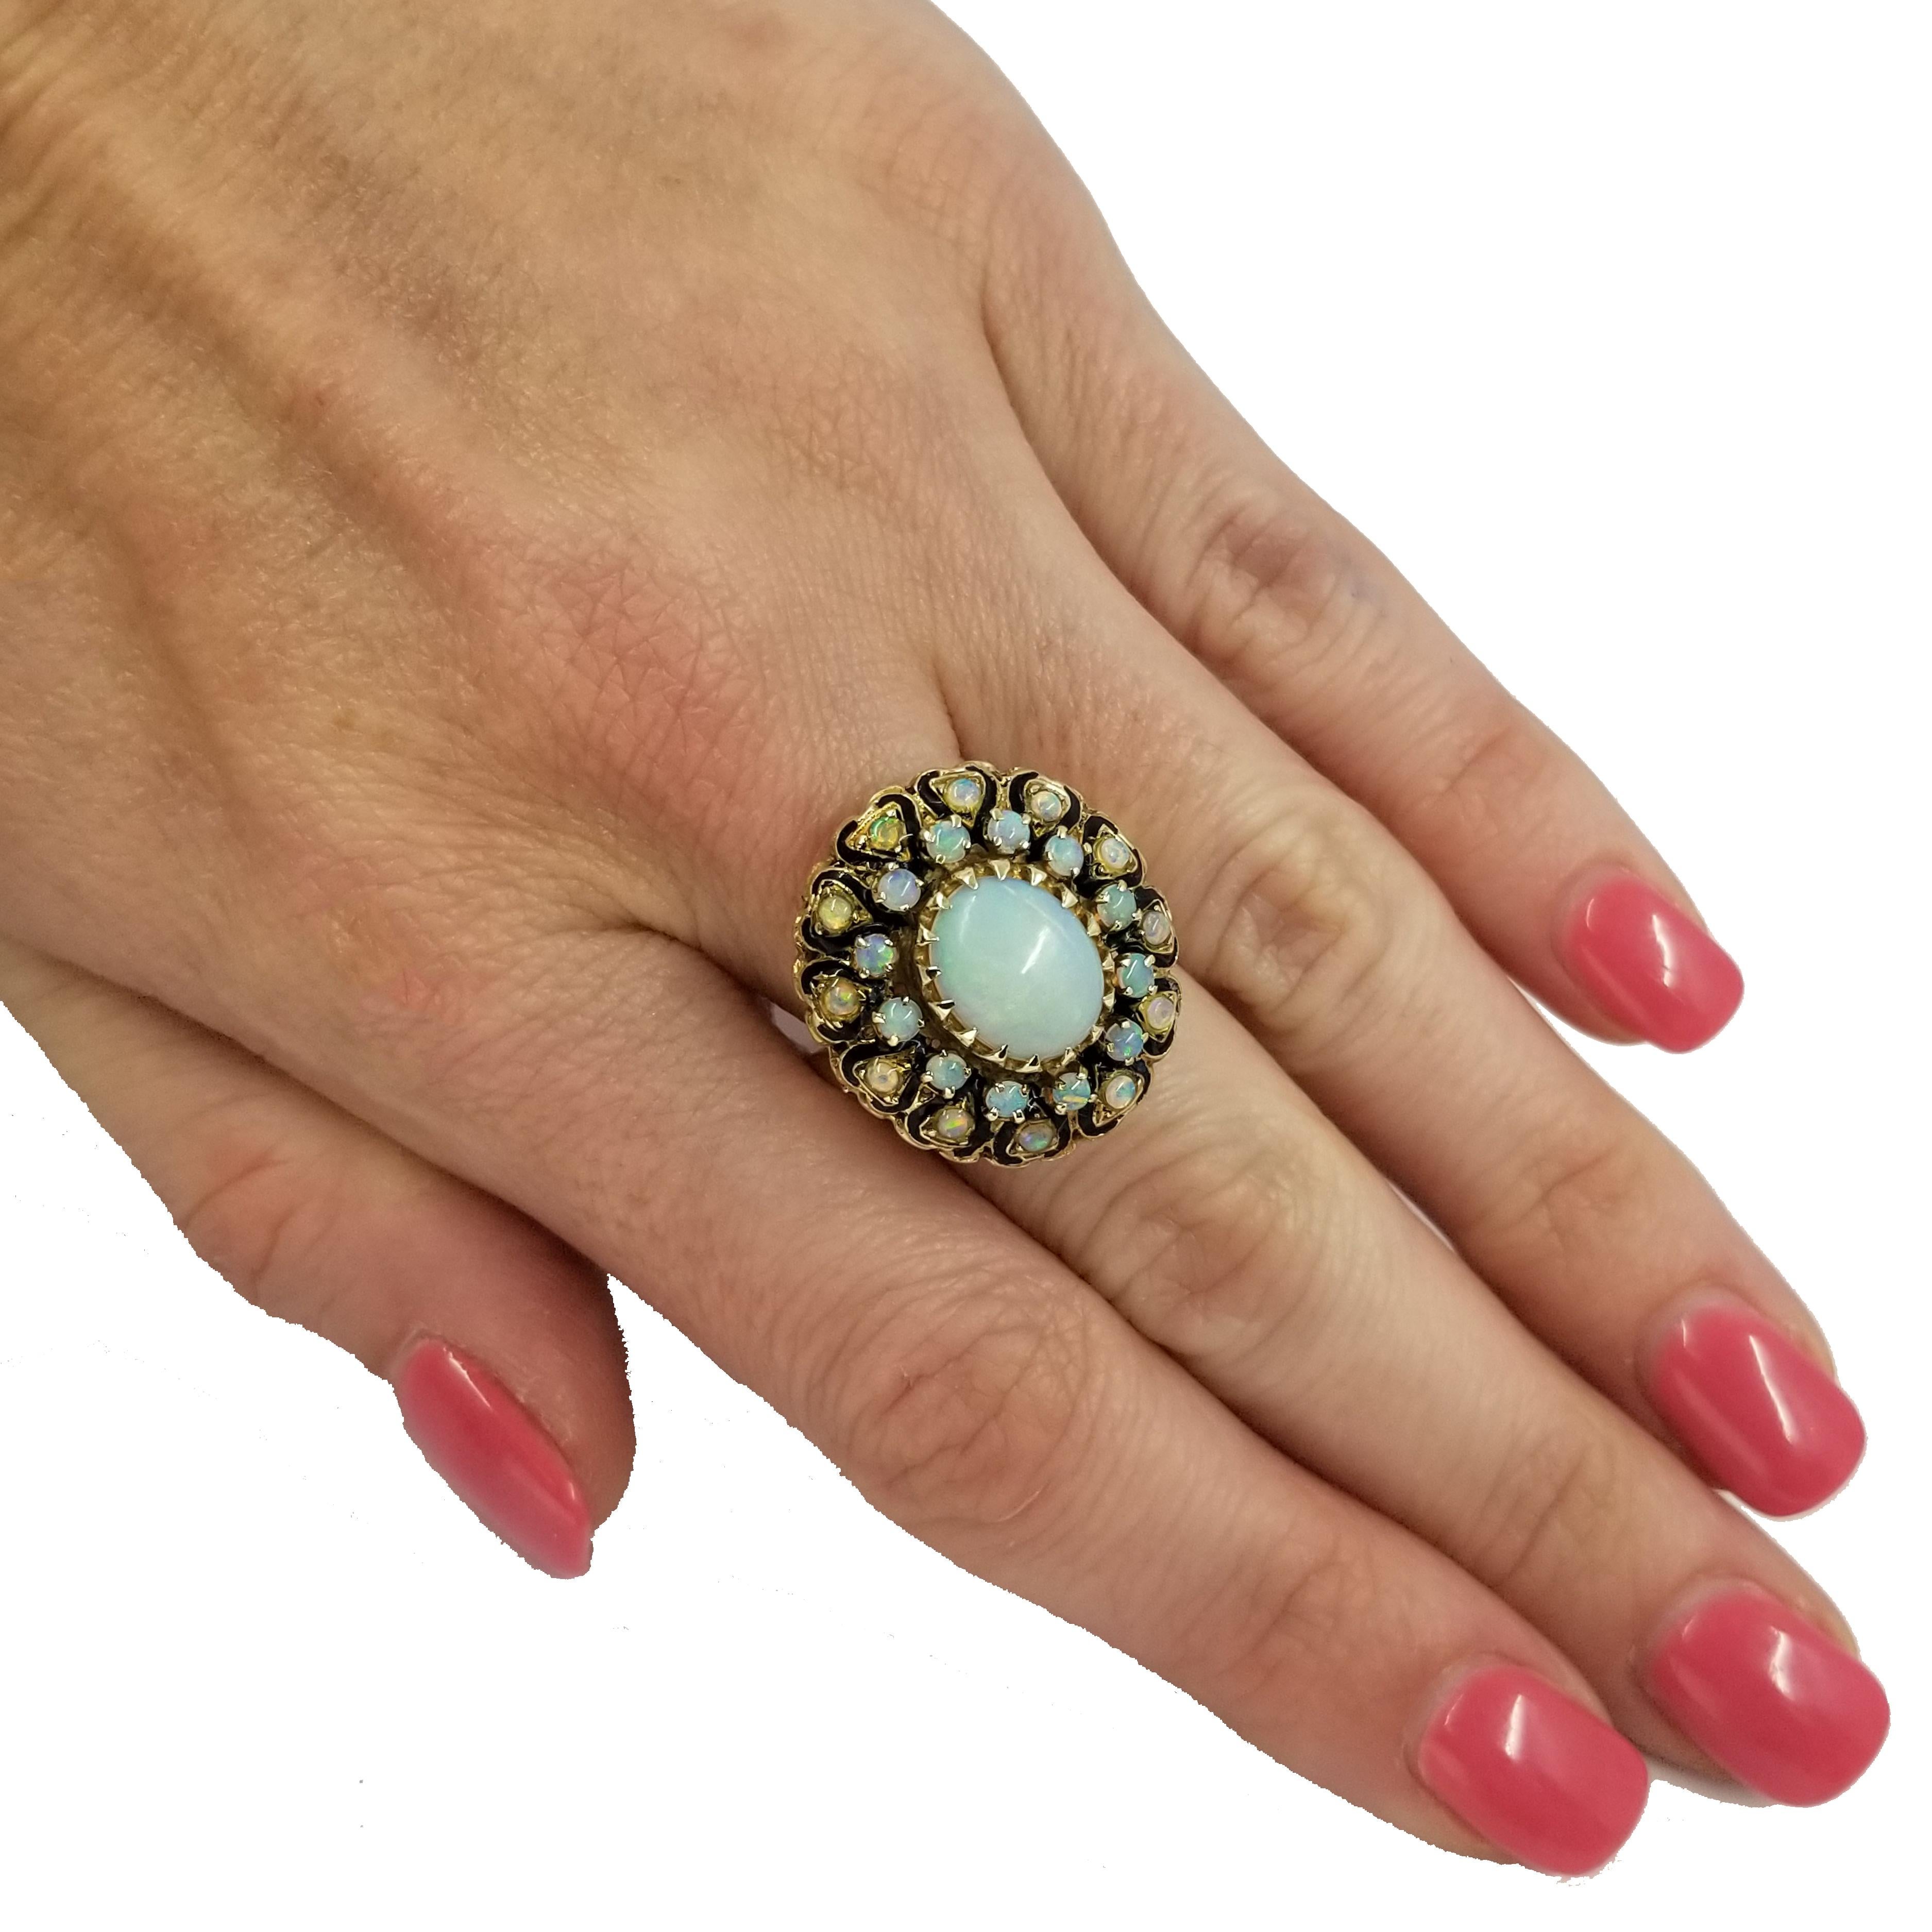 14 Karat Yellow Gold Ring Featuring A Prong Set Oval Opal Surrounded by Two Rows of 24 Prong Set Smaller Round Opals. Opals Have a White Body with Play of Color Phenomenon. Total Carat Weight Is Approximately 3 Carats. The Ring Is Designed with a